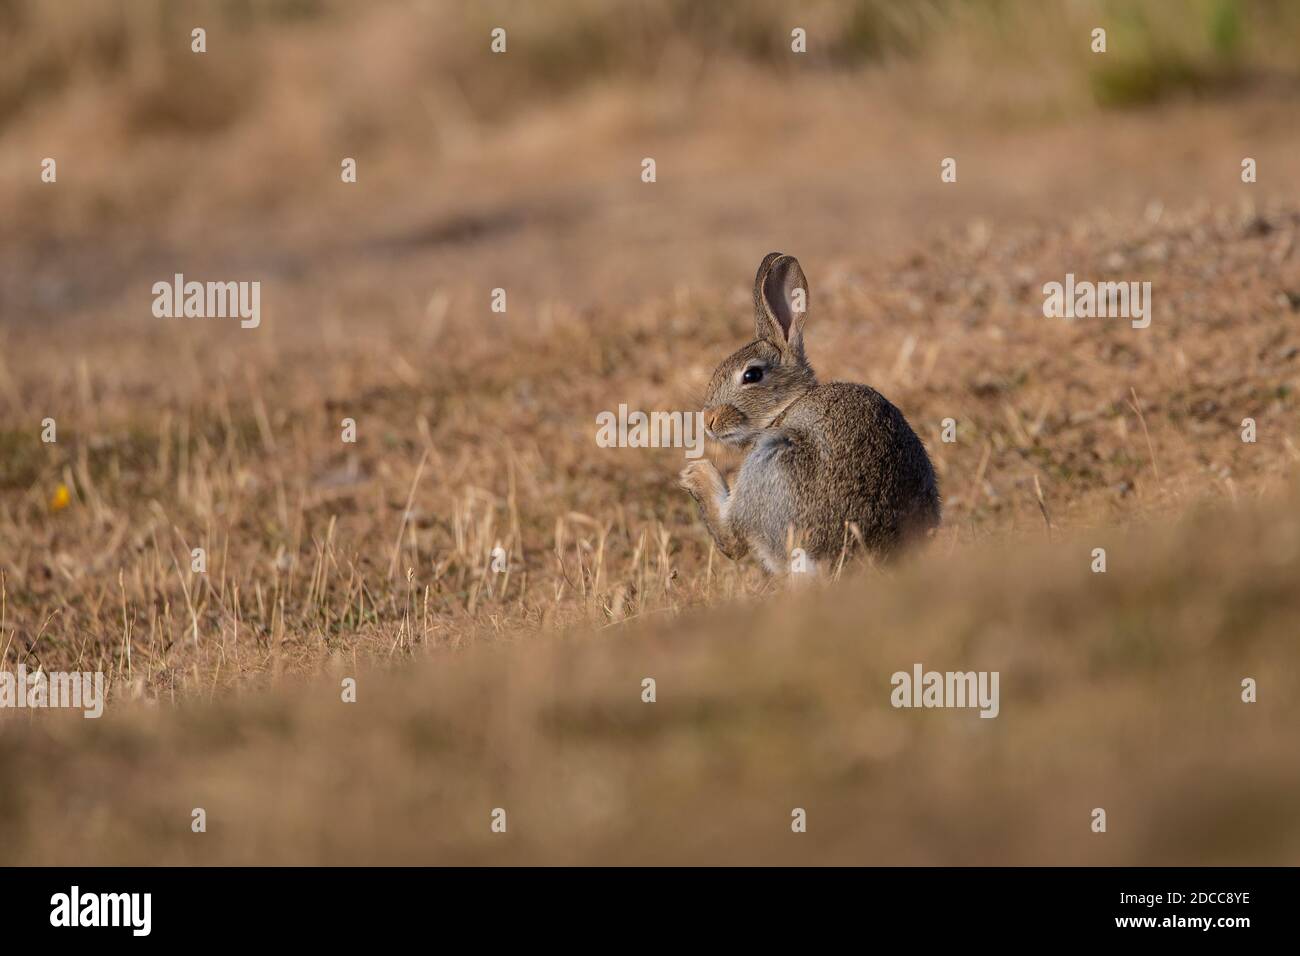 Wild Rabbit Oryctolagus cuniculus preening on the short grass of the Great Orme headland at dawn in North Wales, U.K. Stock Photo